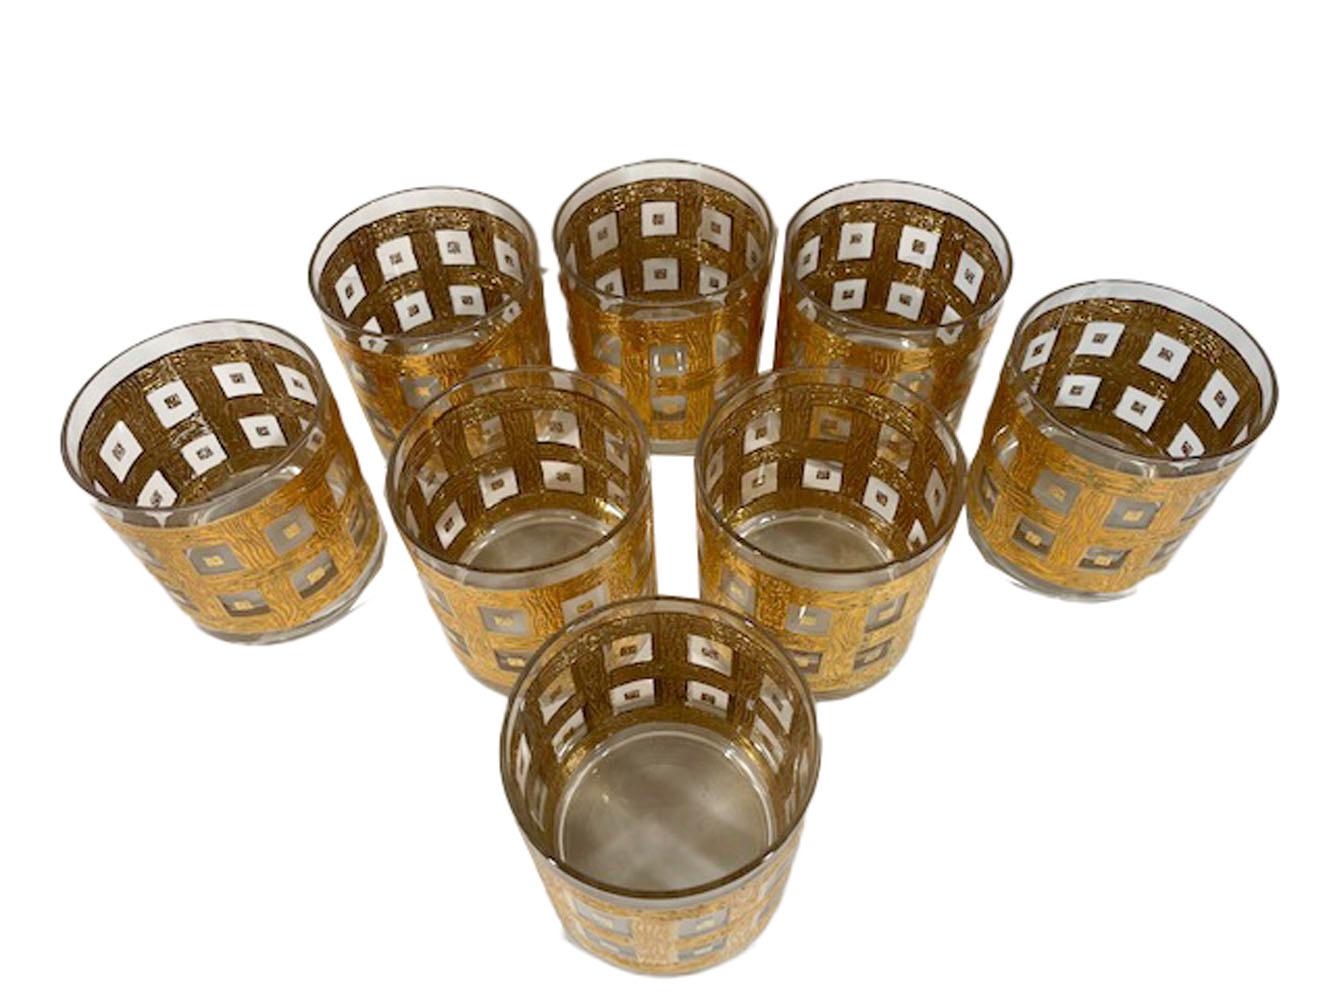 Eight Georges Briard rocks glasses with raised 22 karat gold decoration of woven wood-grained lattice forming a double row of square openings, each with a central gold square.